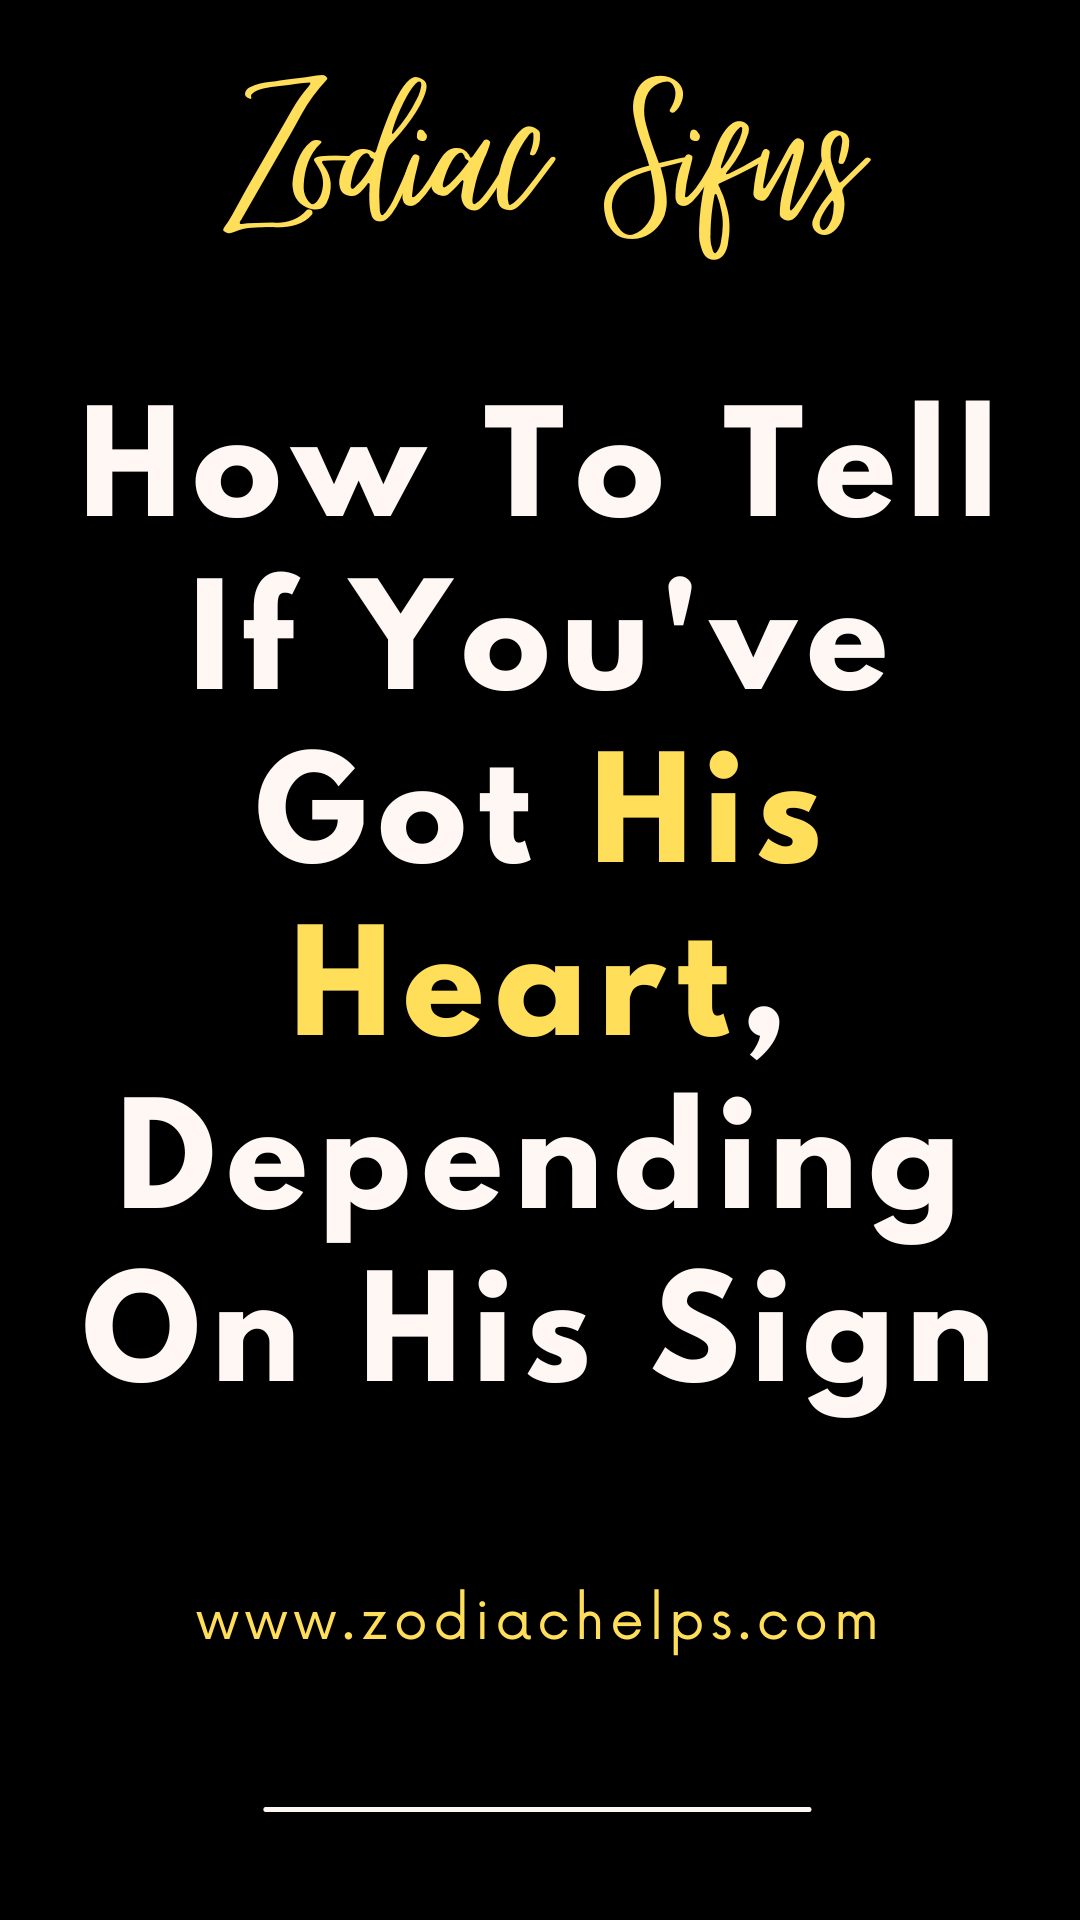 How To Tell If You've Got His Heart, Depending On His Sign